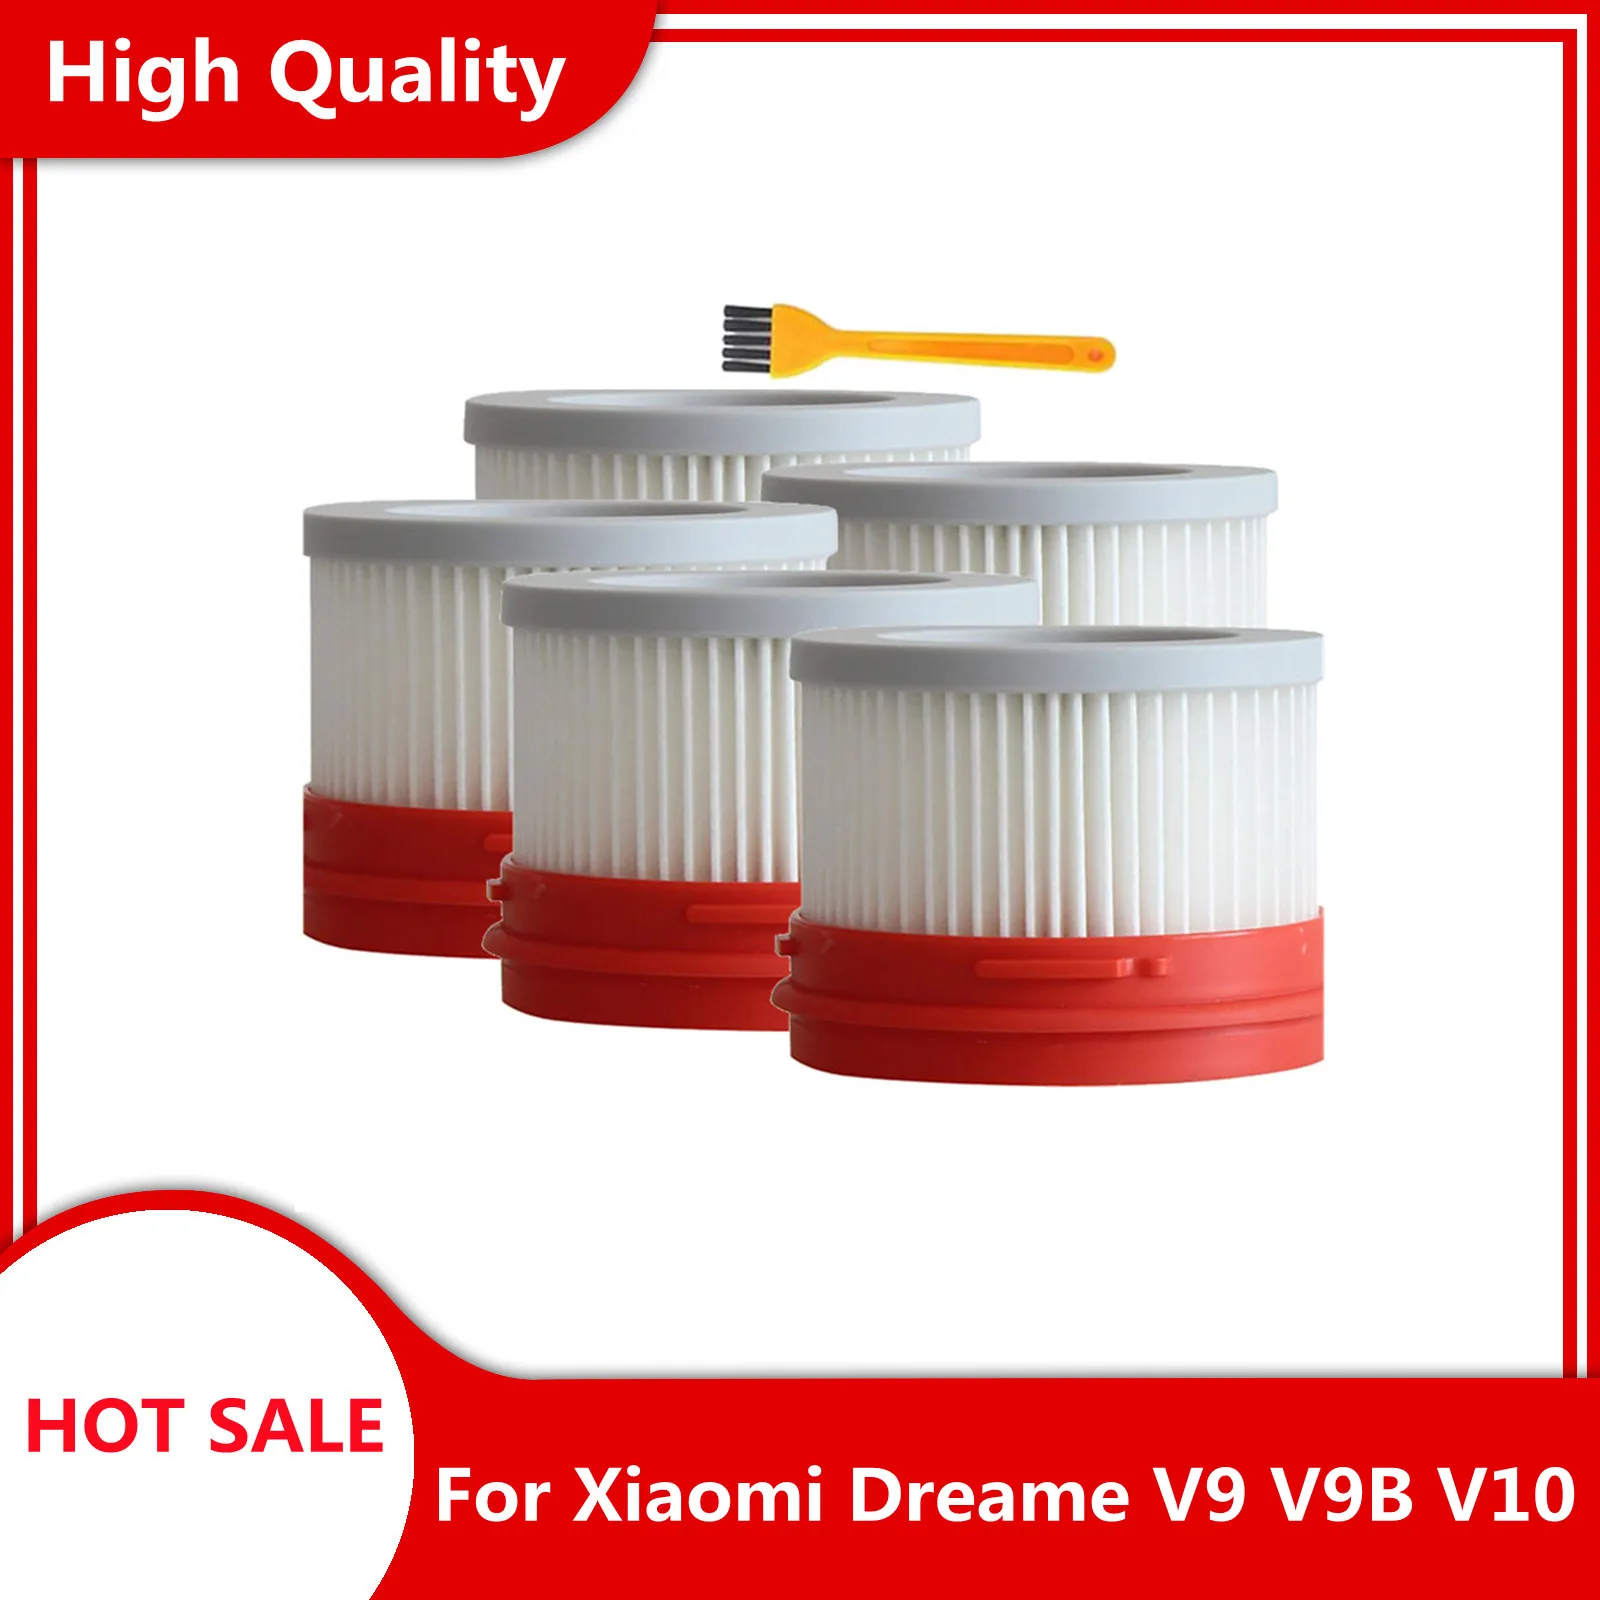 HEPA Filter For Xiaomi Dreame V9 V9B V10 Household Wireless Handheld Vacuum Cleaner Parts Dust Filter Replacement Filters